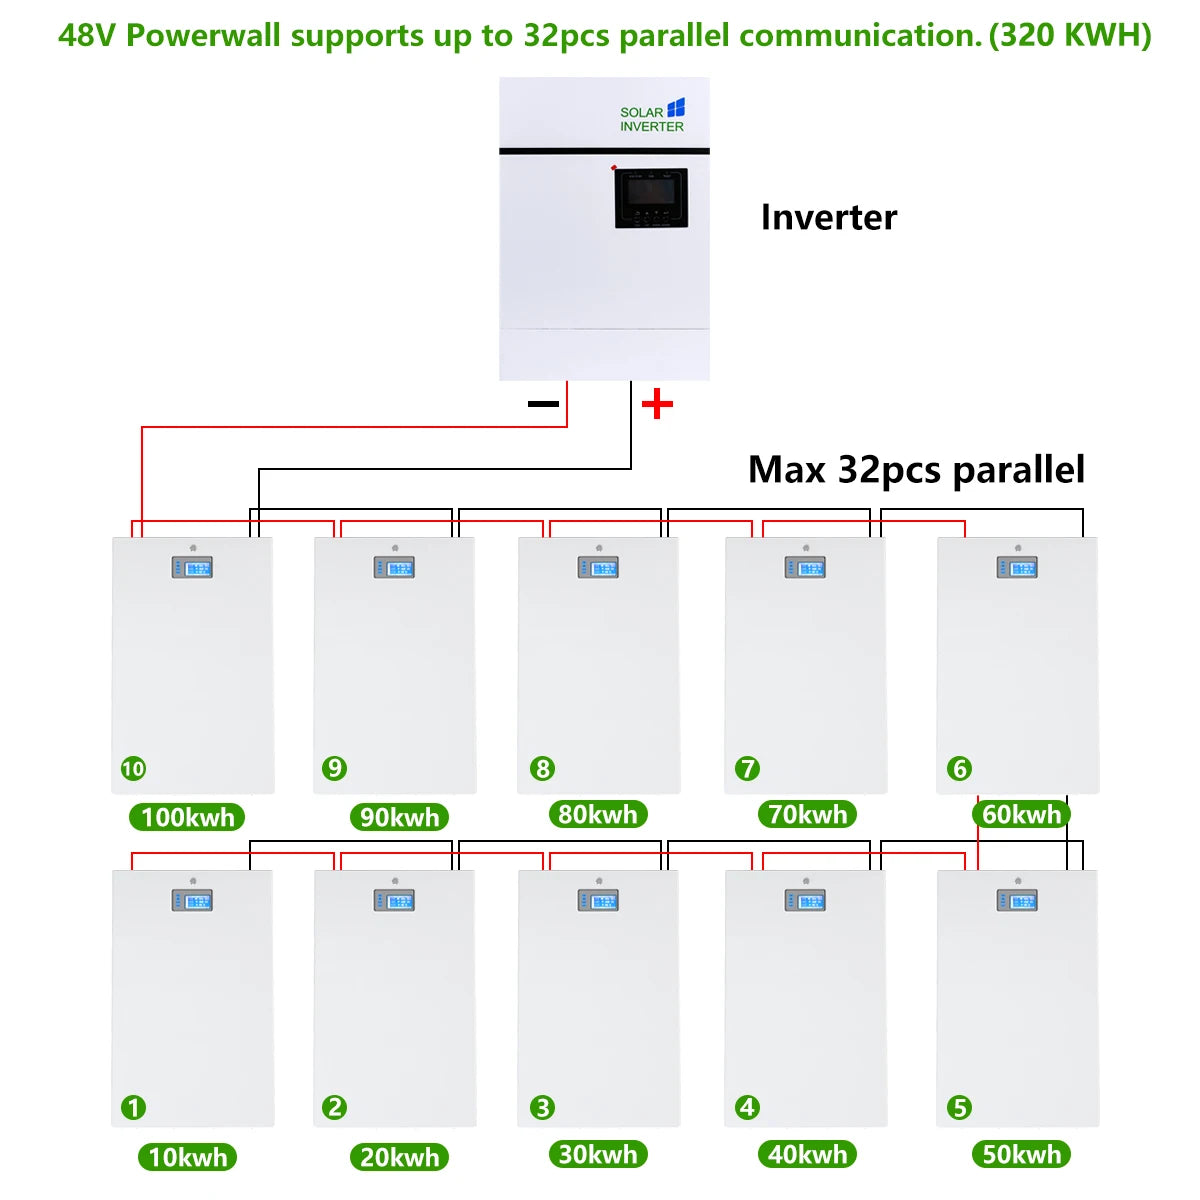 LiFePO4 Battery, Powerwall supports up to 32 connections, offering total capacity of 320 kWh.